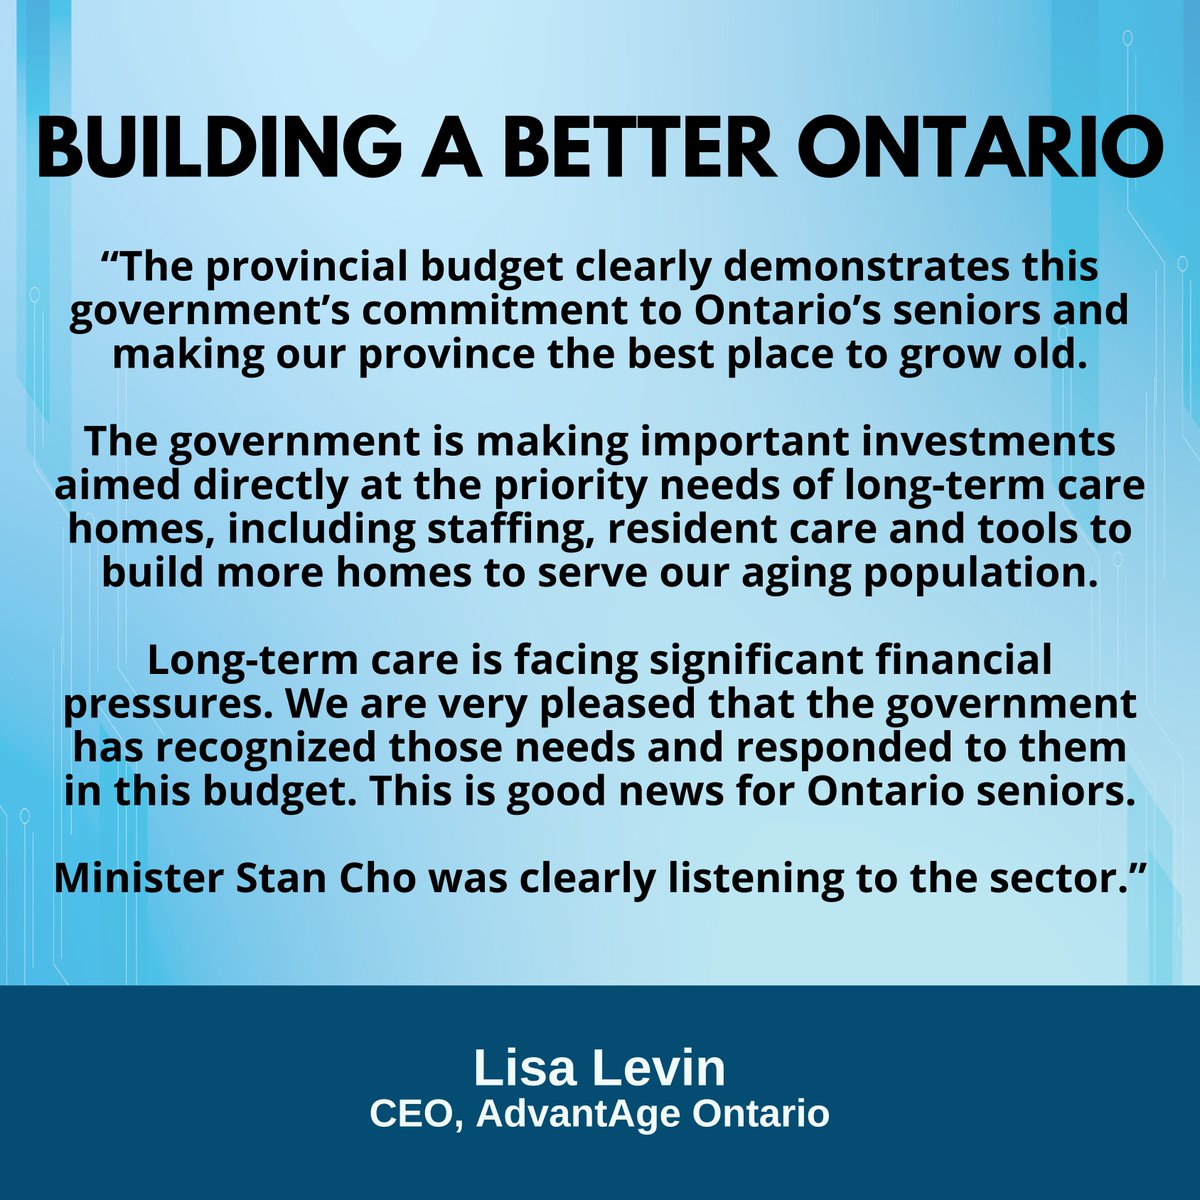 Our government’s key investments in long-term care are helping build more homes, increase staffing, and expand resident care. Read what AdvantAge Ontario - the province’s voice for not-for-profit senior care - had to say about #ONBudget2024.